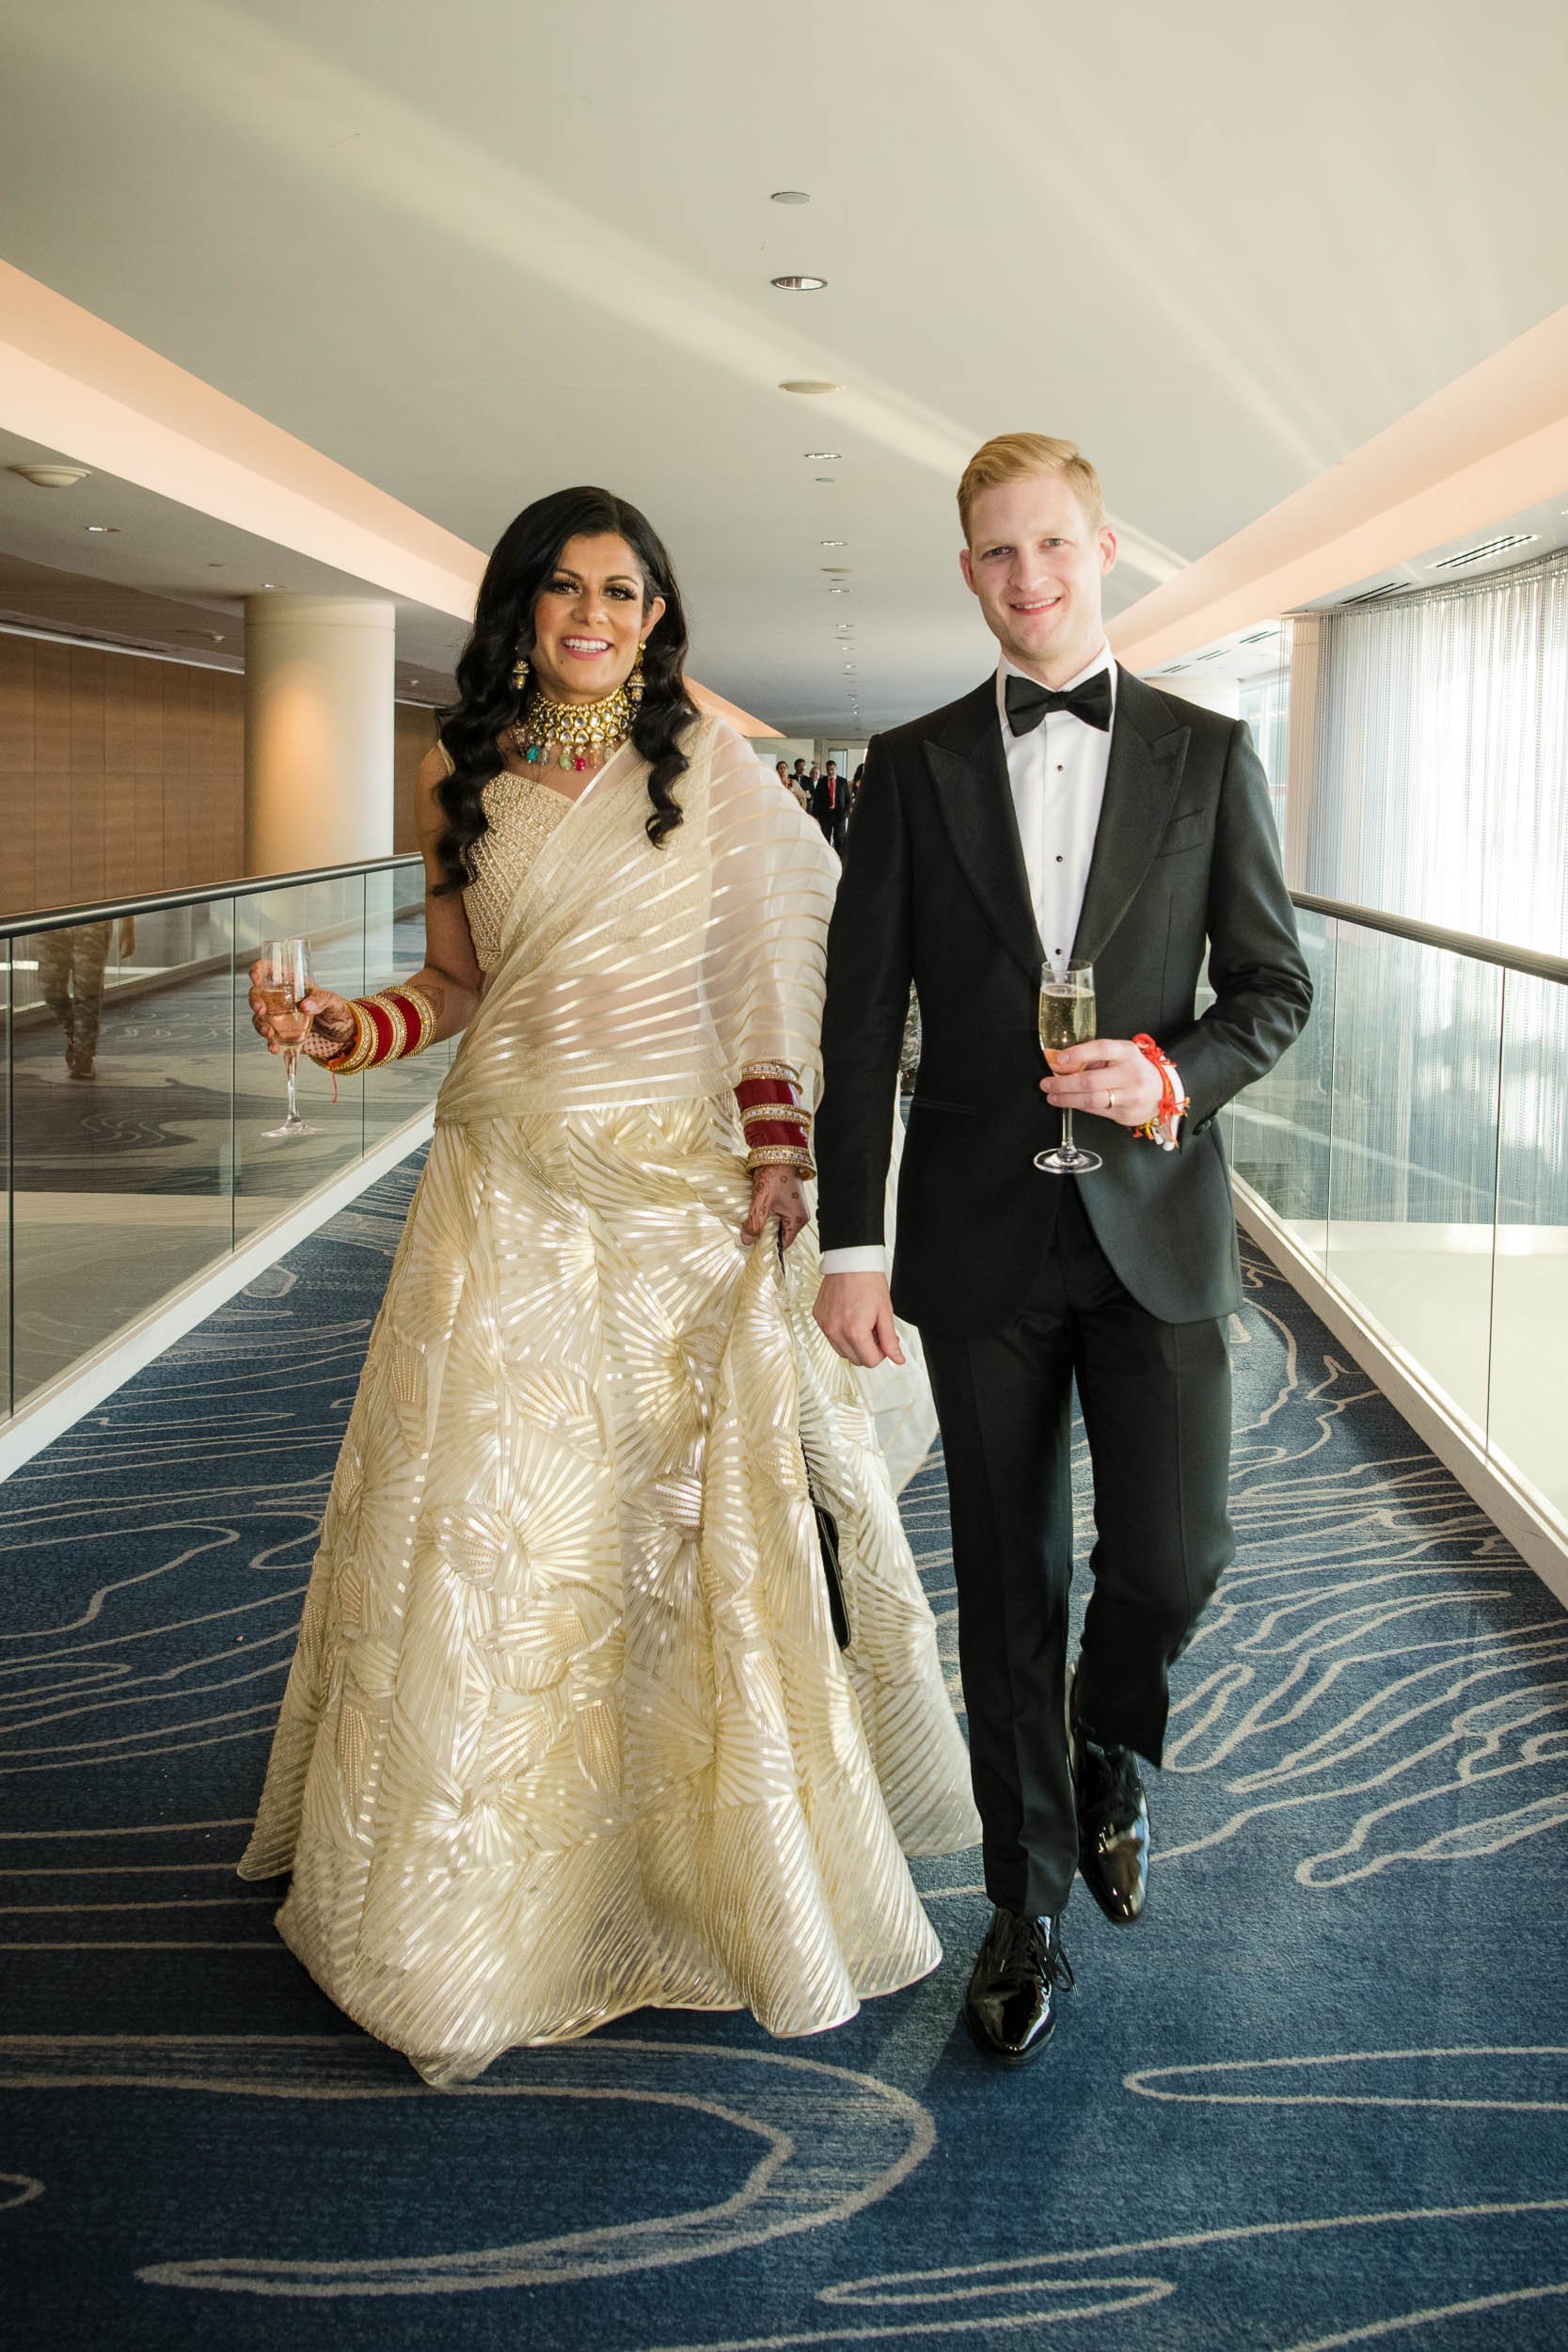 Indian Wedding Photographers Chicago | Renaissance Schaumburg | J. Brown Photography | bride and groom reception introduction.